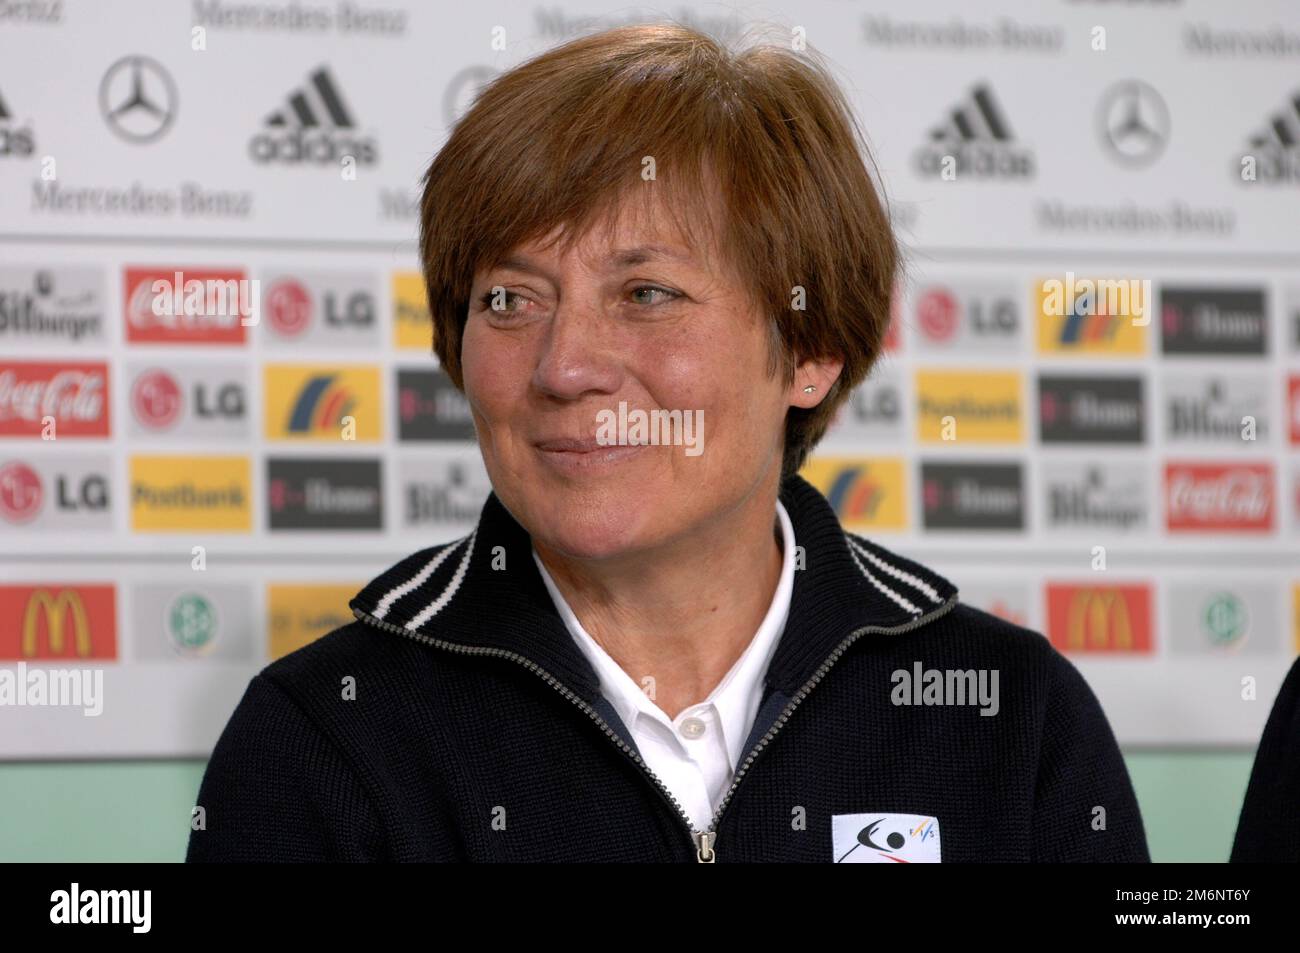 ROSI MITTERMAIER died at the age of 72 after a long and serious illness. ARCHIVE PHOTO: Rosi MITTERMAIER, EX ski racer, portrait. DFB nominates squad for the soccer Euro 2008 Austria/Switzerland on May 16th, 2008 on the Zugspitze. ?SVEN SIMON, Princess-Luise-Str.41#45479 Muelheim/Ruhr#tel.0208/9413250#fax 0208/9413260#account 244 293 433 P ostbank E ssen BLZ 360 100 43#www.SvenSimon.net#e-mail :SvenSimon@t-online.de. Stock Photo